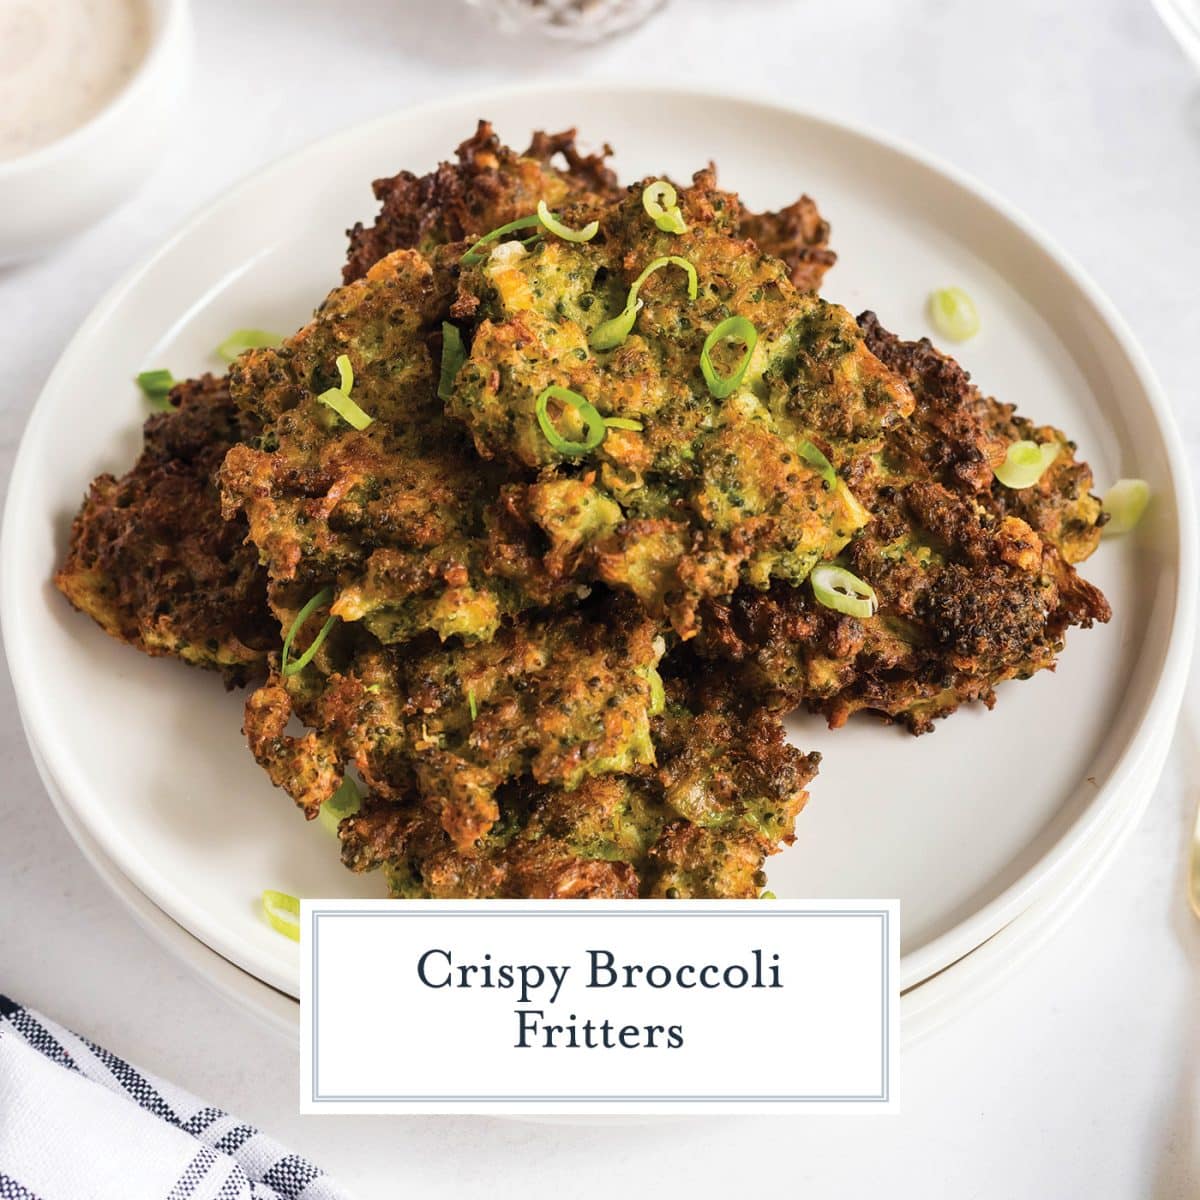 plate of broccoli fritters with text overlay for facebook